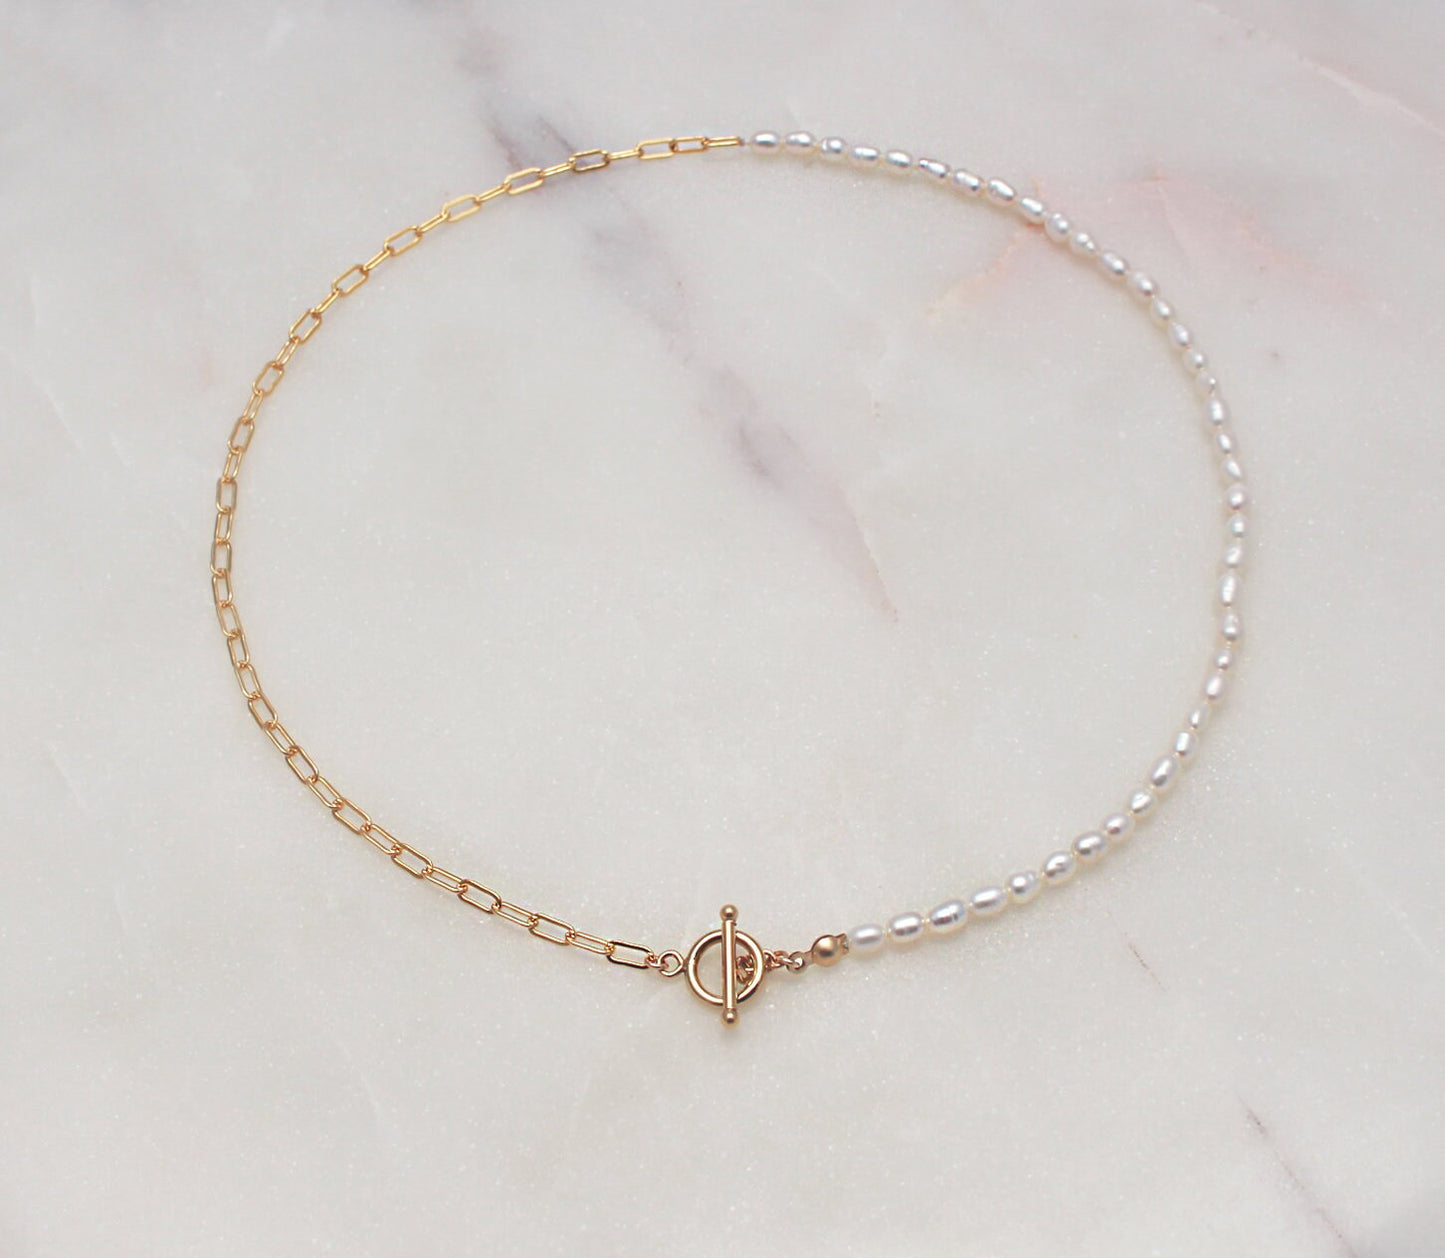 Half & Half Pearl Choker Necklace - 14k Gold Filled 3.1mm Rectangle Chain and Toggle, 3-4mm White Freshwater Pearl